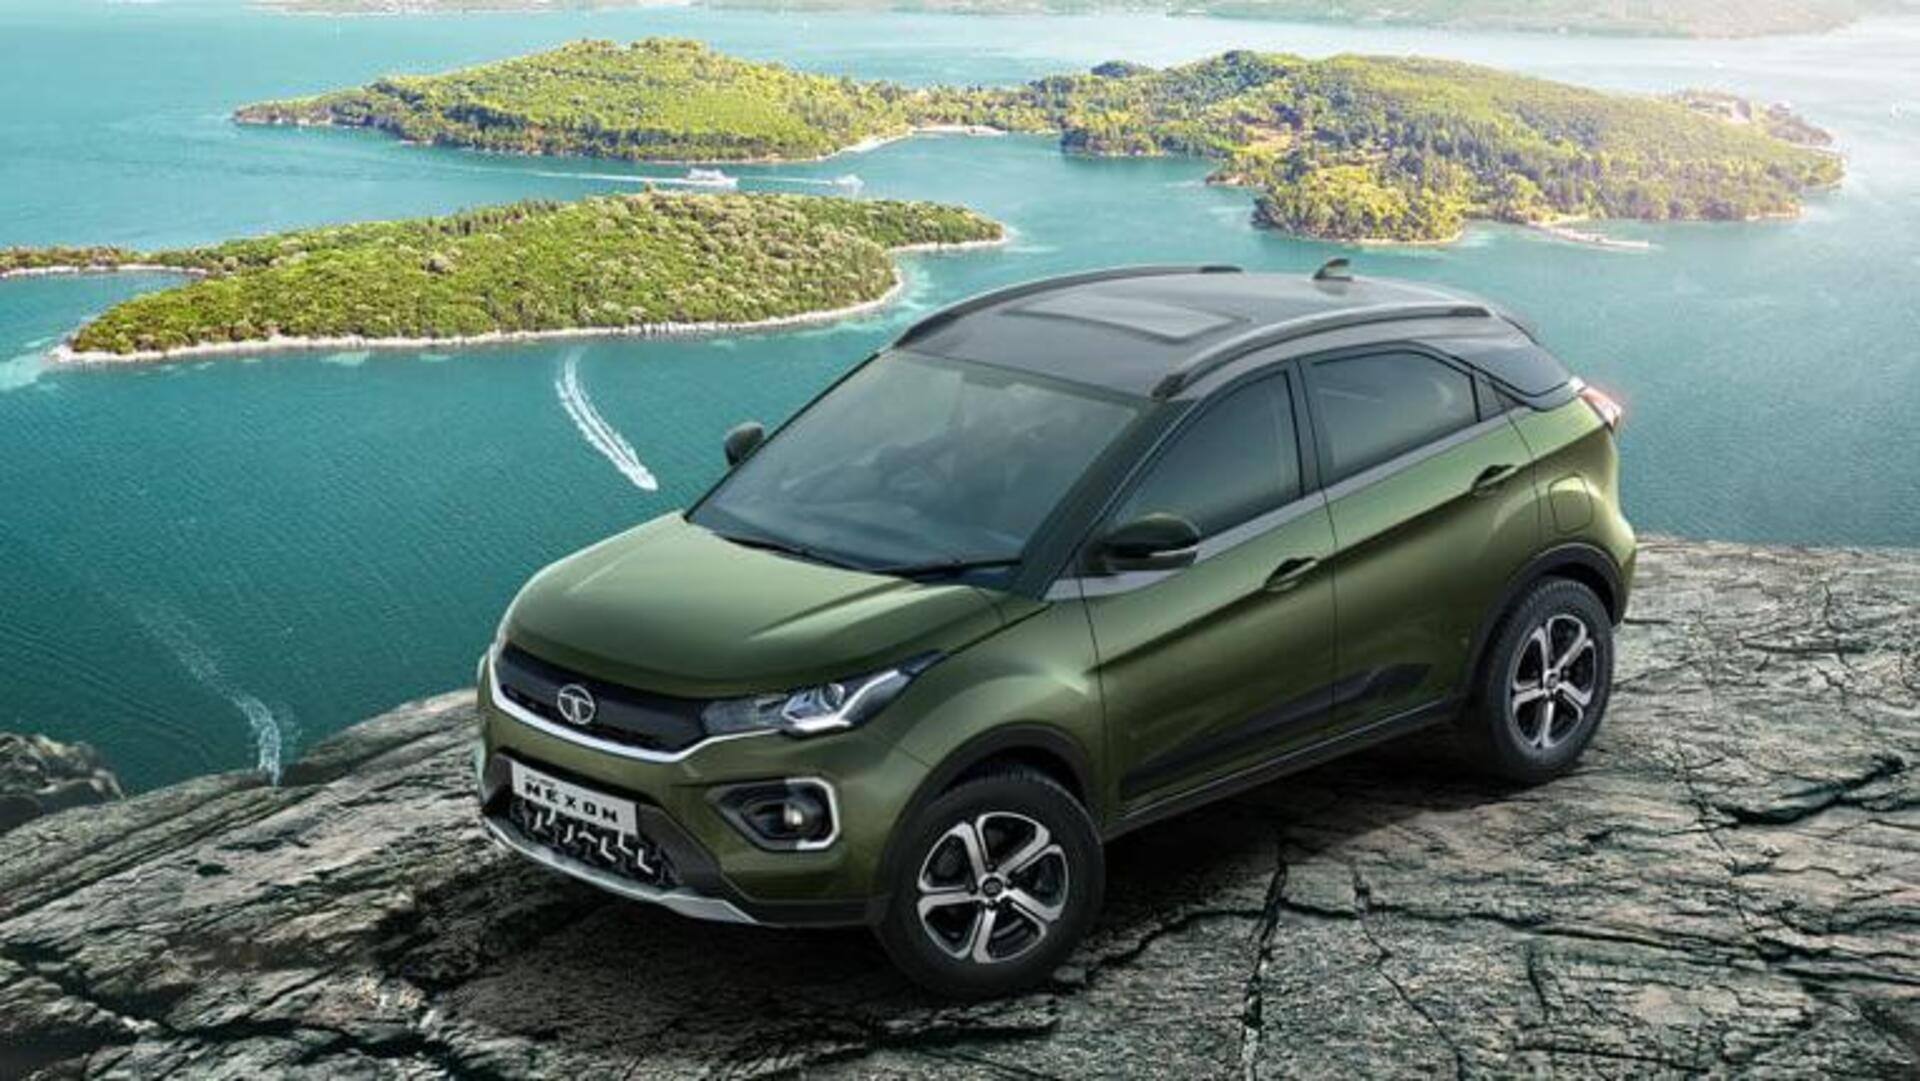 Variant-wise features of Tata Nexon (facelift) leaked